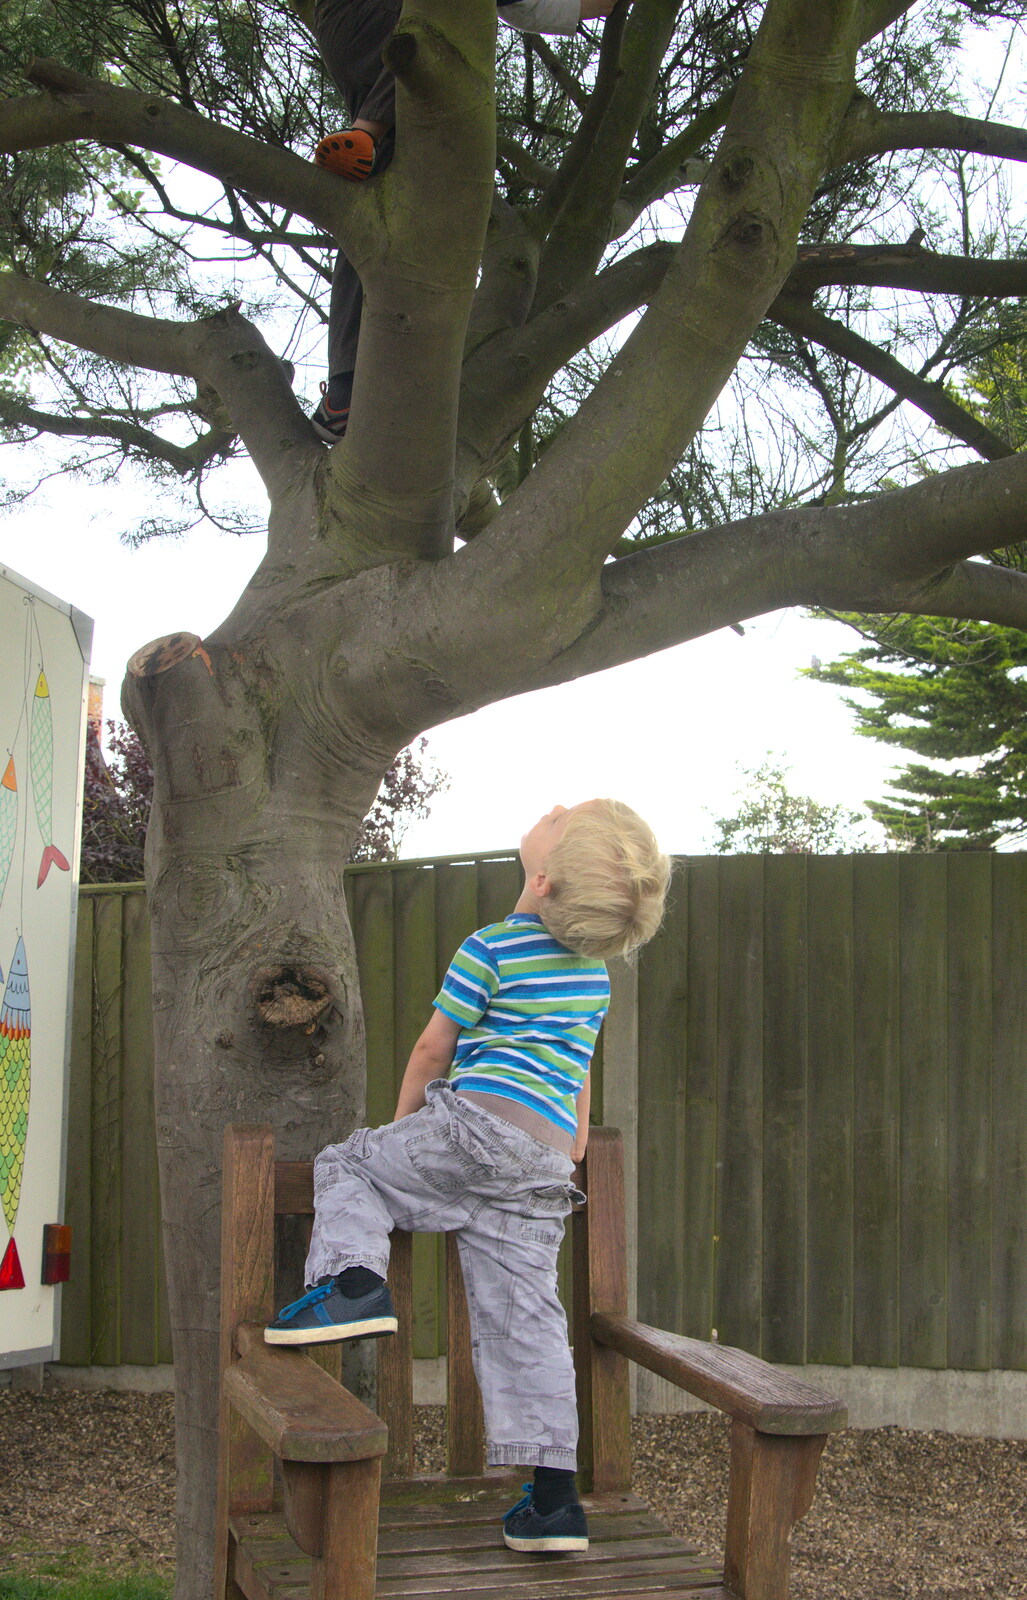 Harry looks up at Fred from The Danger of Trees: A Camping (Mis)adventure - Southwold, Suffolk - 3rd August 2015